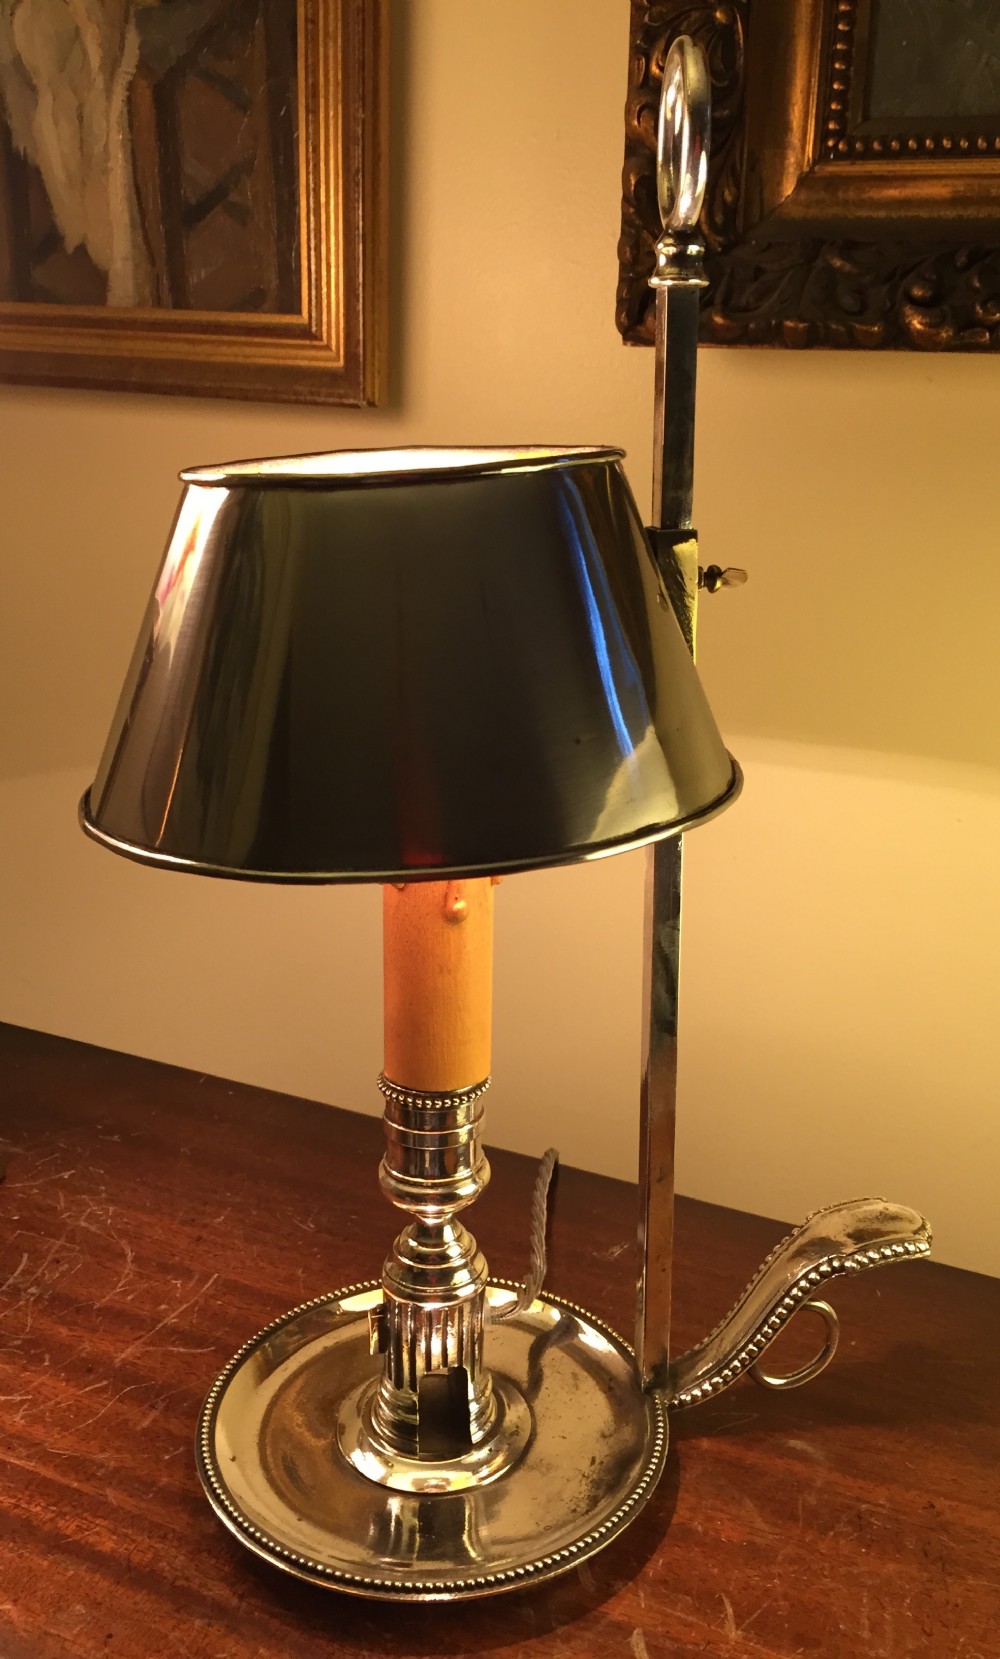 bouillotte silver plated desk or consol lamp1920 silver plated desk lamp 1920 desk or consol lamp silver plated